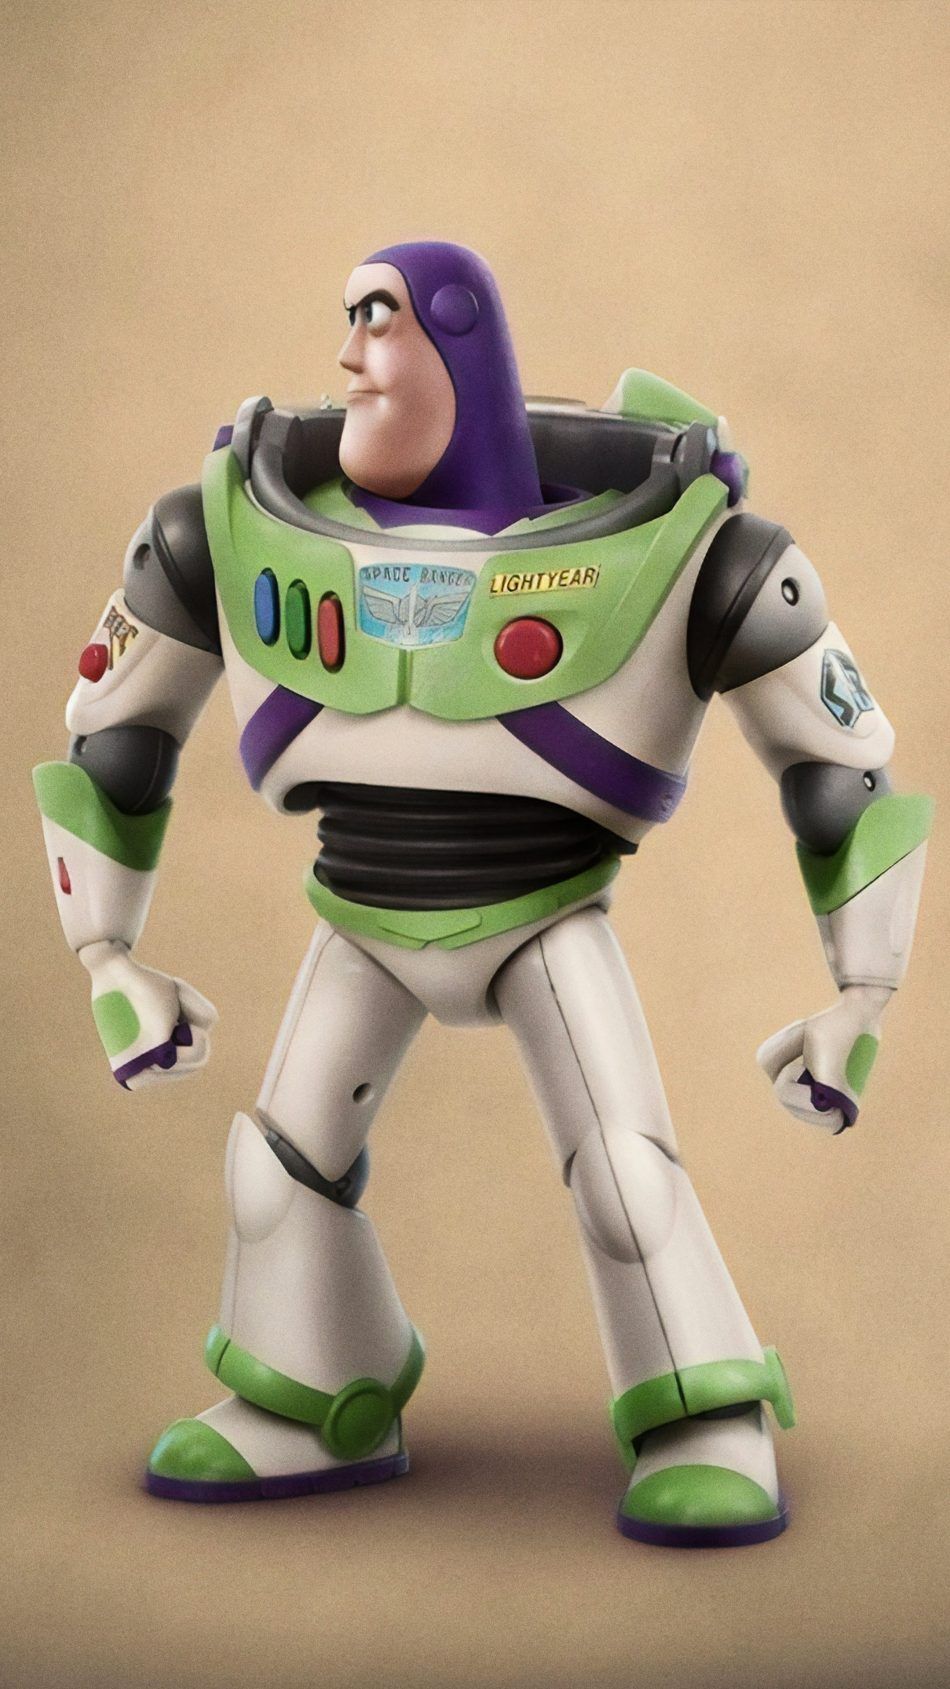 Buzz Lightyear Toy Story 4 4K Ultra HD Mobile Wallpapers